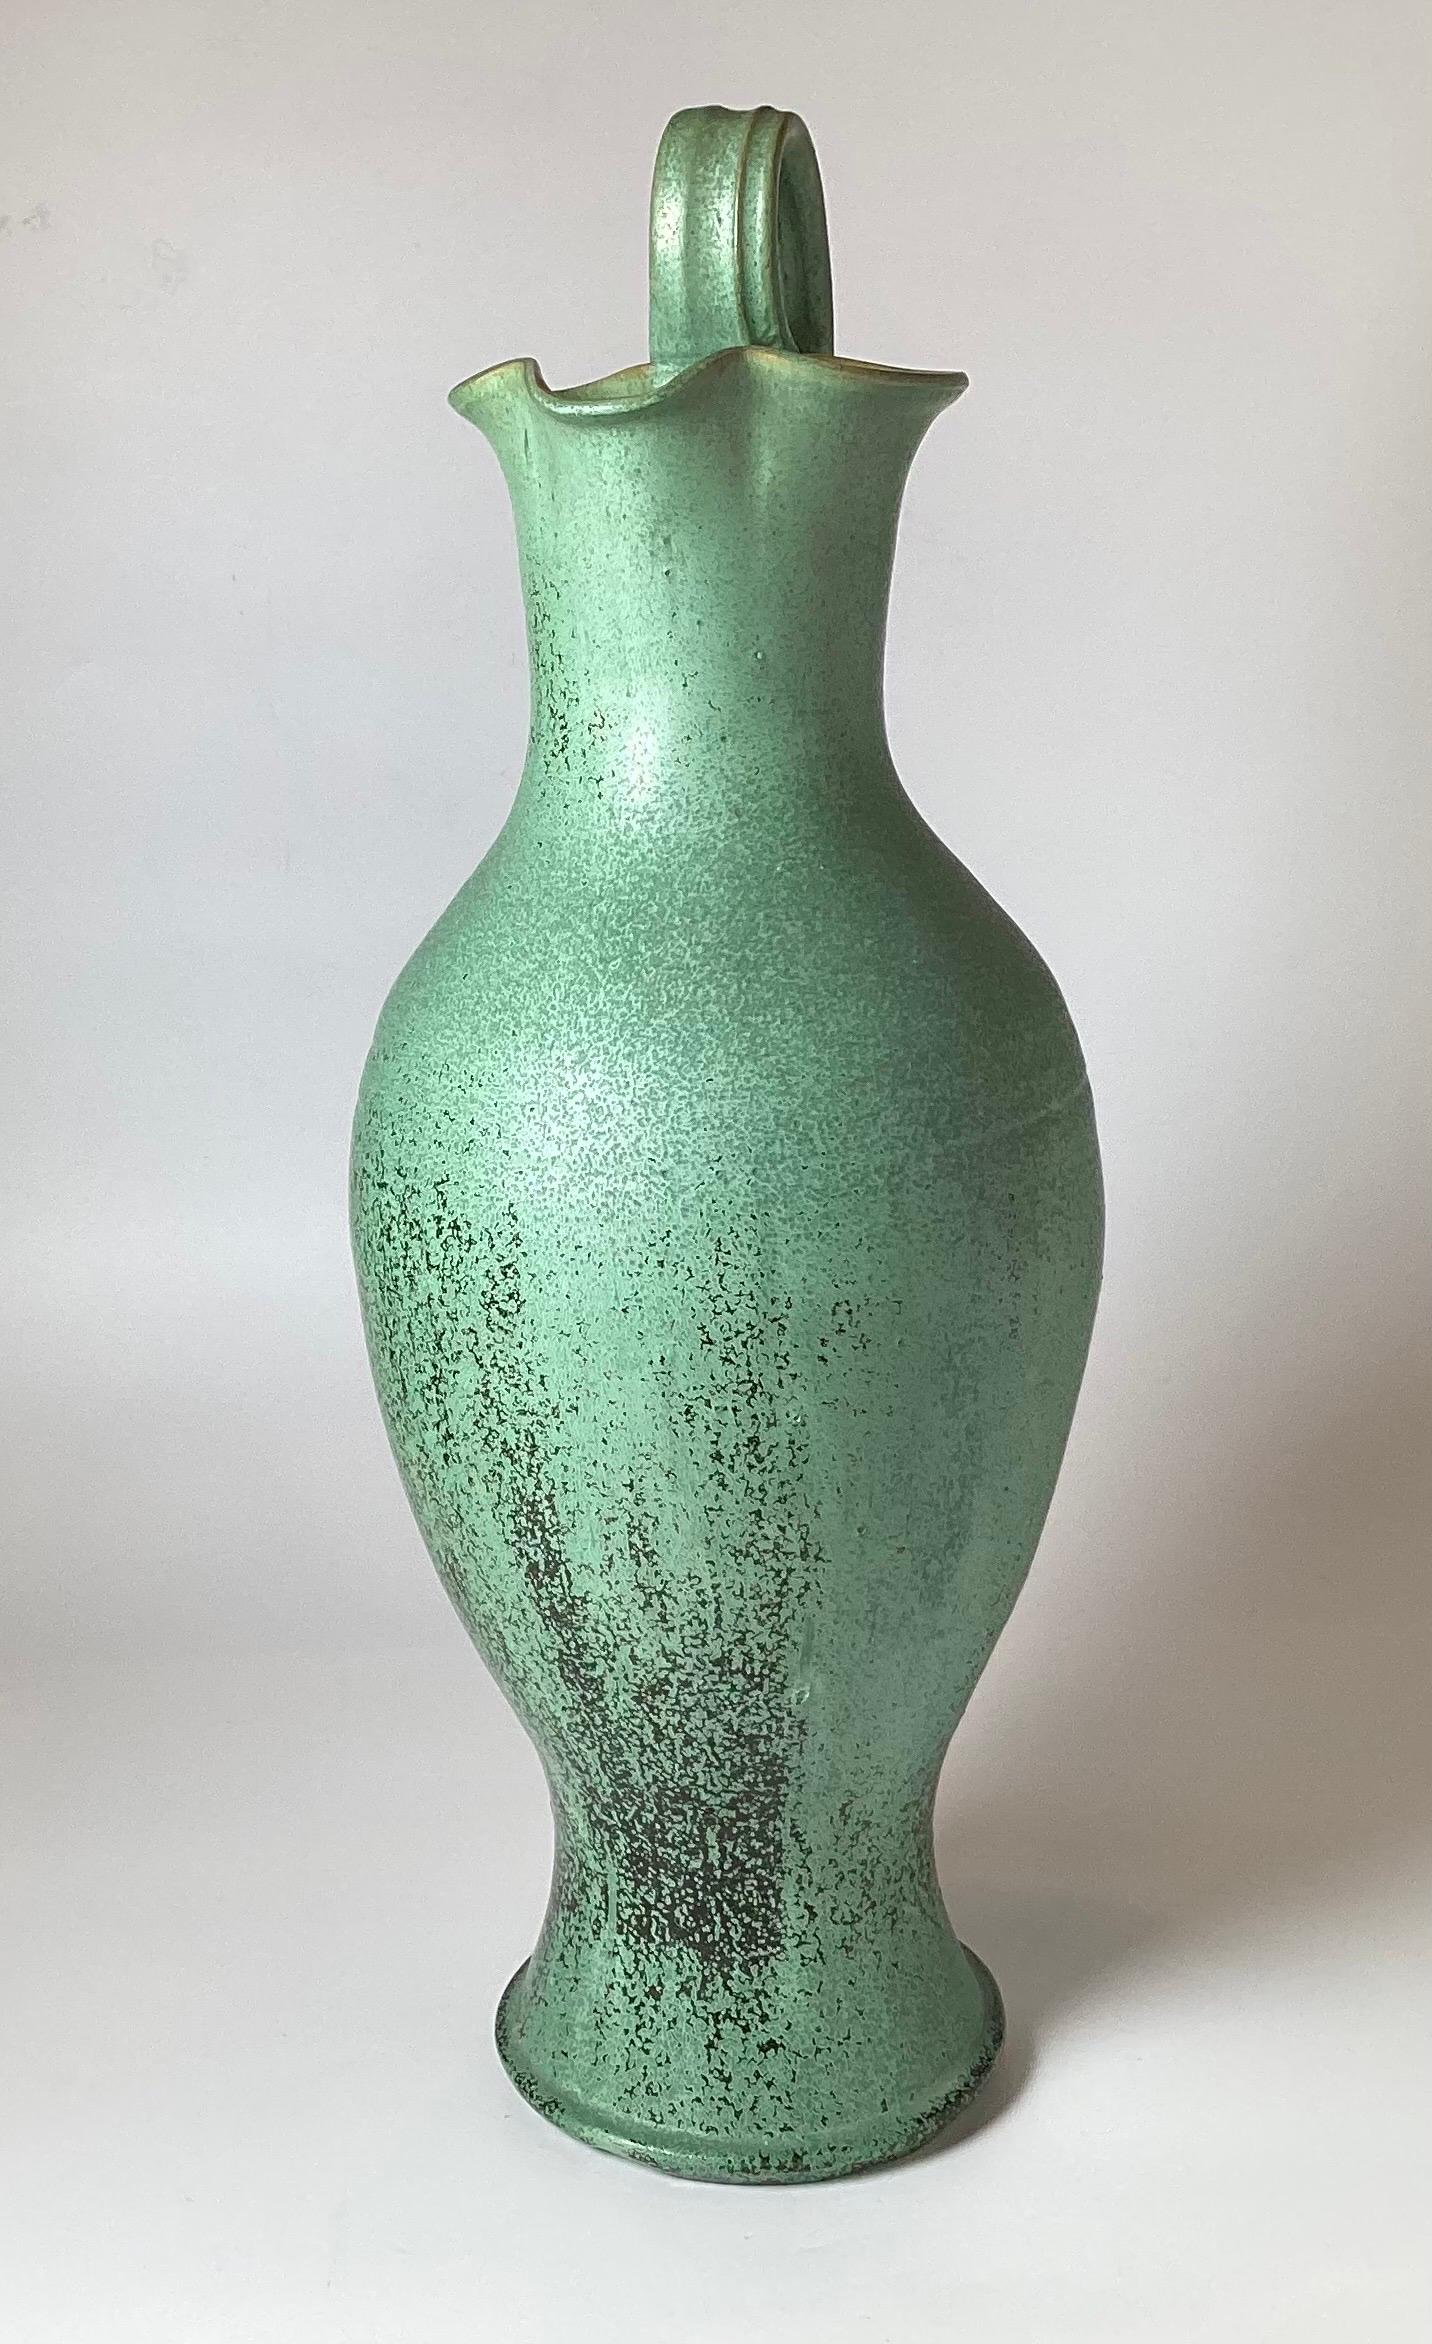 Elegant Verdi green glazed Grecian style terra cotta ewer, circa 1920s measuring 27 inches tall, 11 inches diameter. The green and black glaze with a stippled effect in a jade green color.